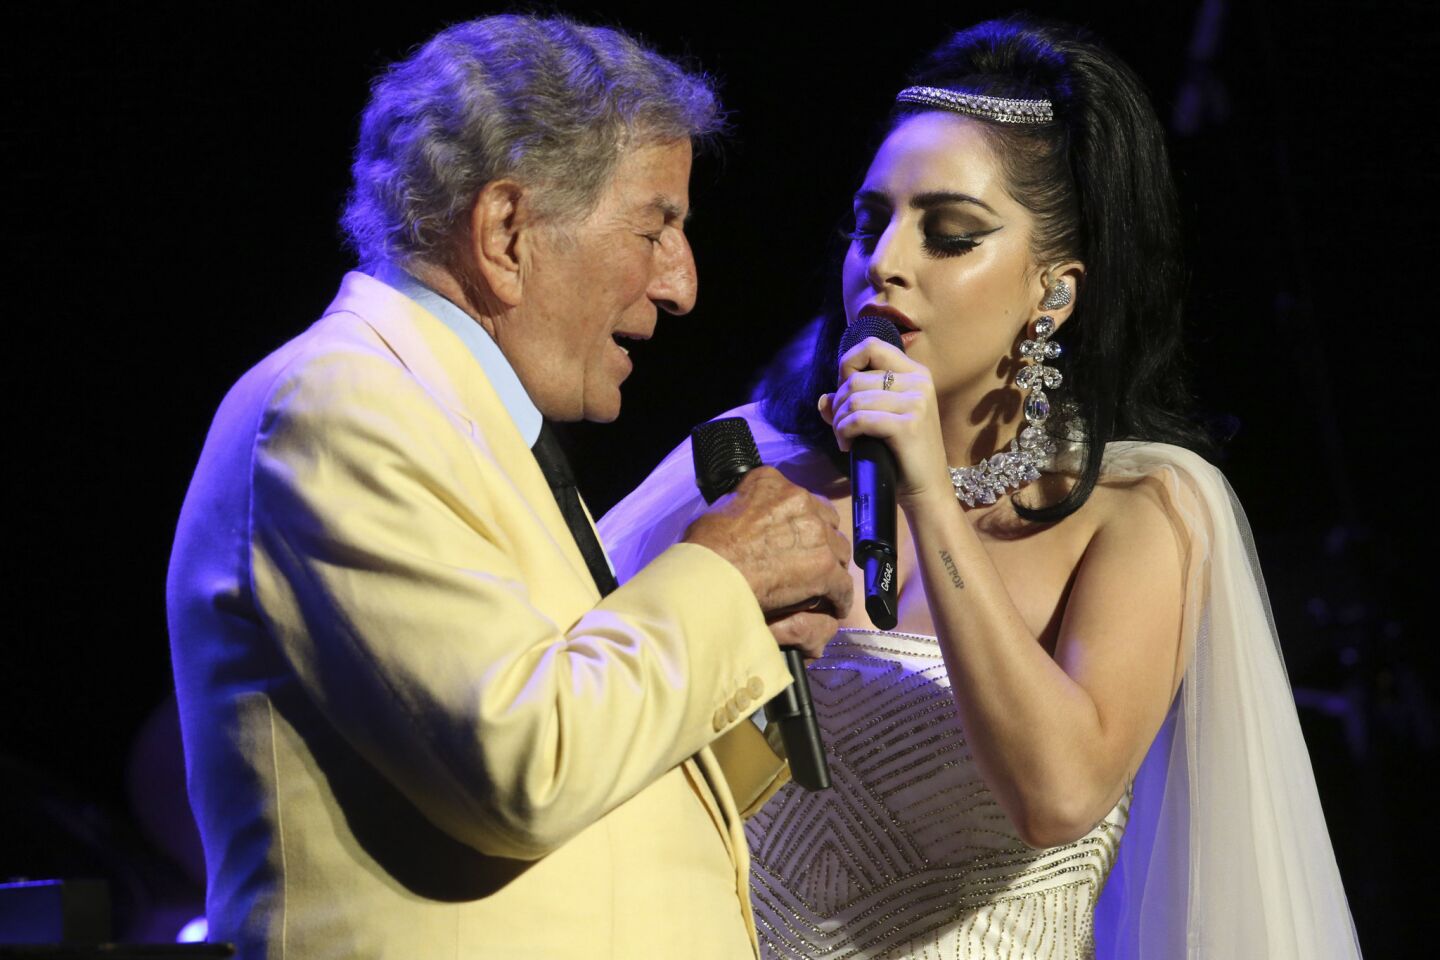 Tony Bennett has won 17 Grammy Awards, including a Grammy Lifetime Achievement Award. Lady Gaga, who has five Grammy accolades, is nominated this year with Bennett for traditional pop vocal album.